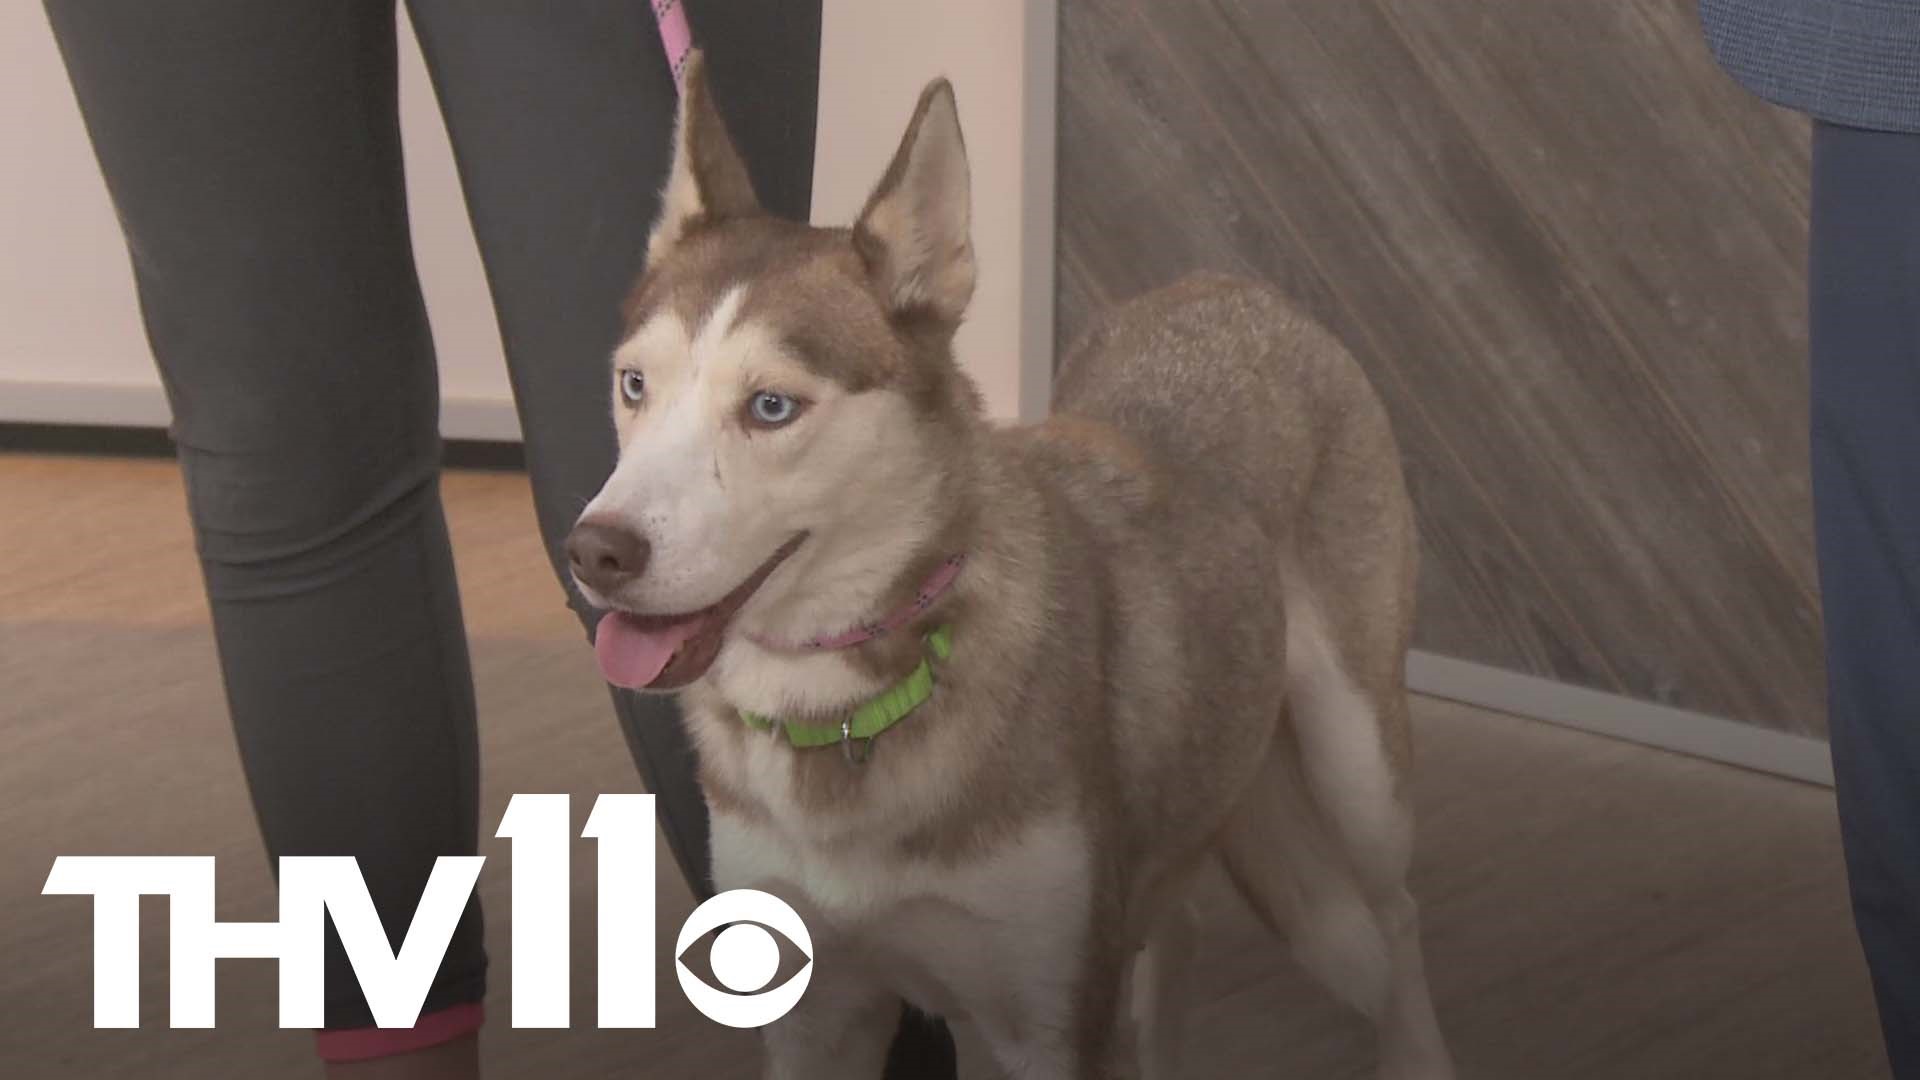 Meet Serena, our Pet of the Week from the Little Rock Animal Village! This beautiful 2-year-old husky pup is ready to be adopted and find a forever home.